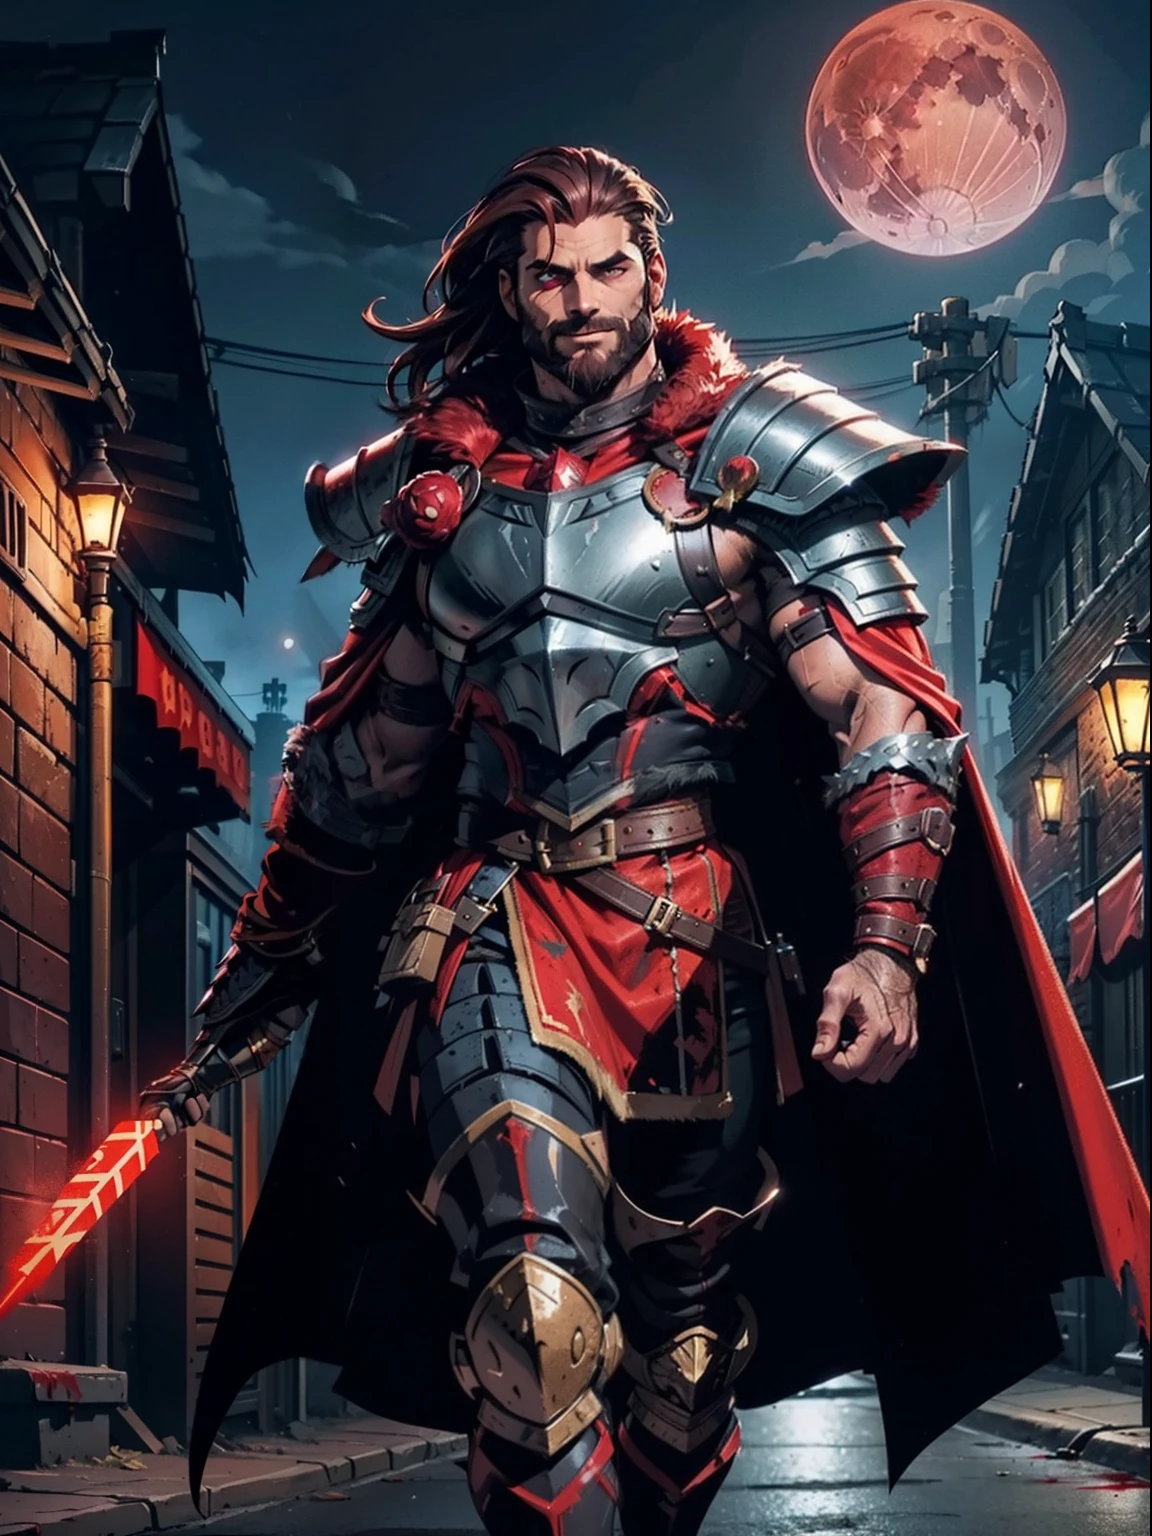 Dark night blood moon background, Darkest Dungeon style, walking on the street. Todd Smith as Ares from Xena, athlete, short mane hair, mullet, defined face, detailed eyes, short beard, glowing red eyes, dark hair, wily smile, badass, dangerous. Wearing full red armor with scales, cape of furs.